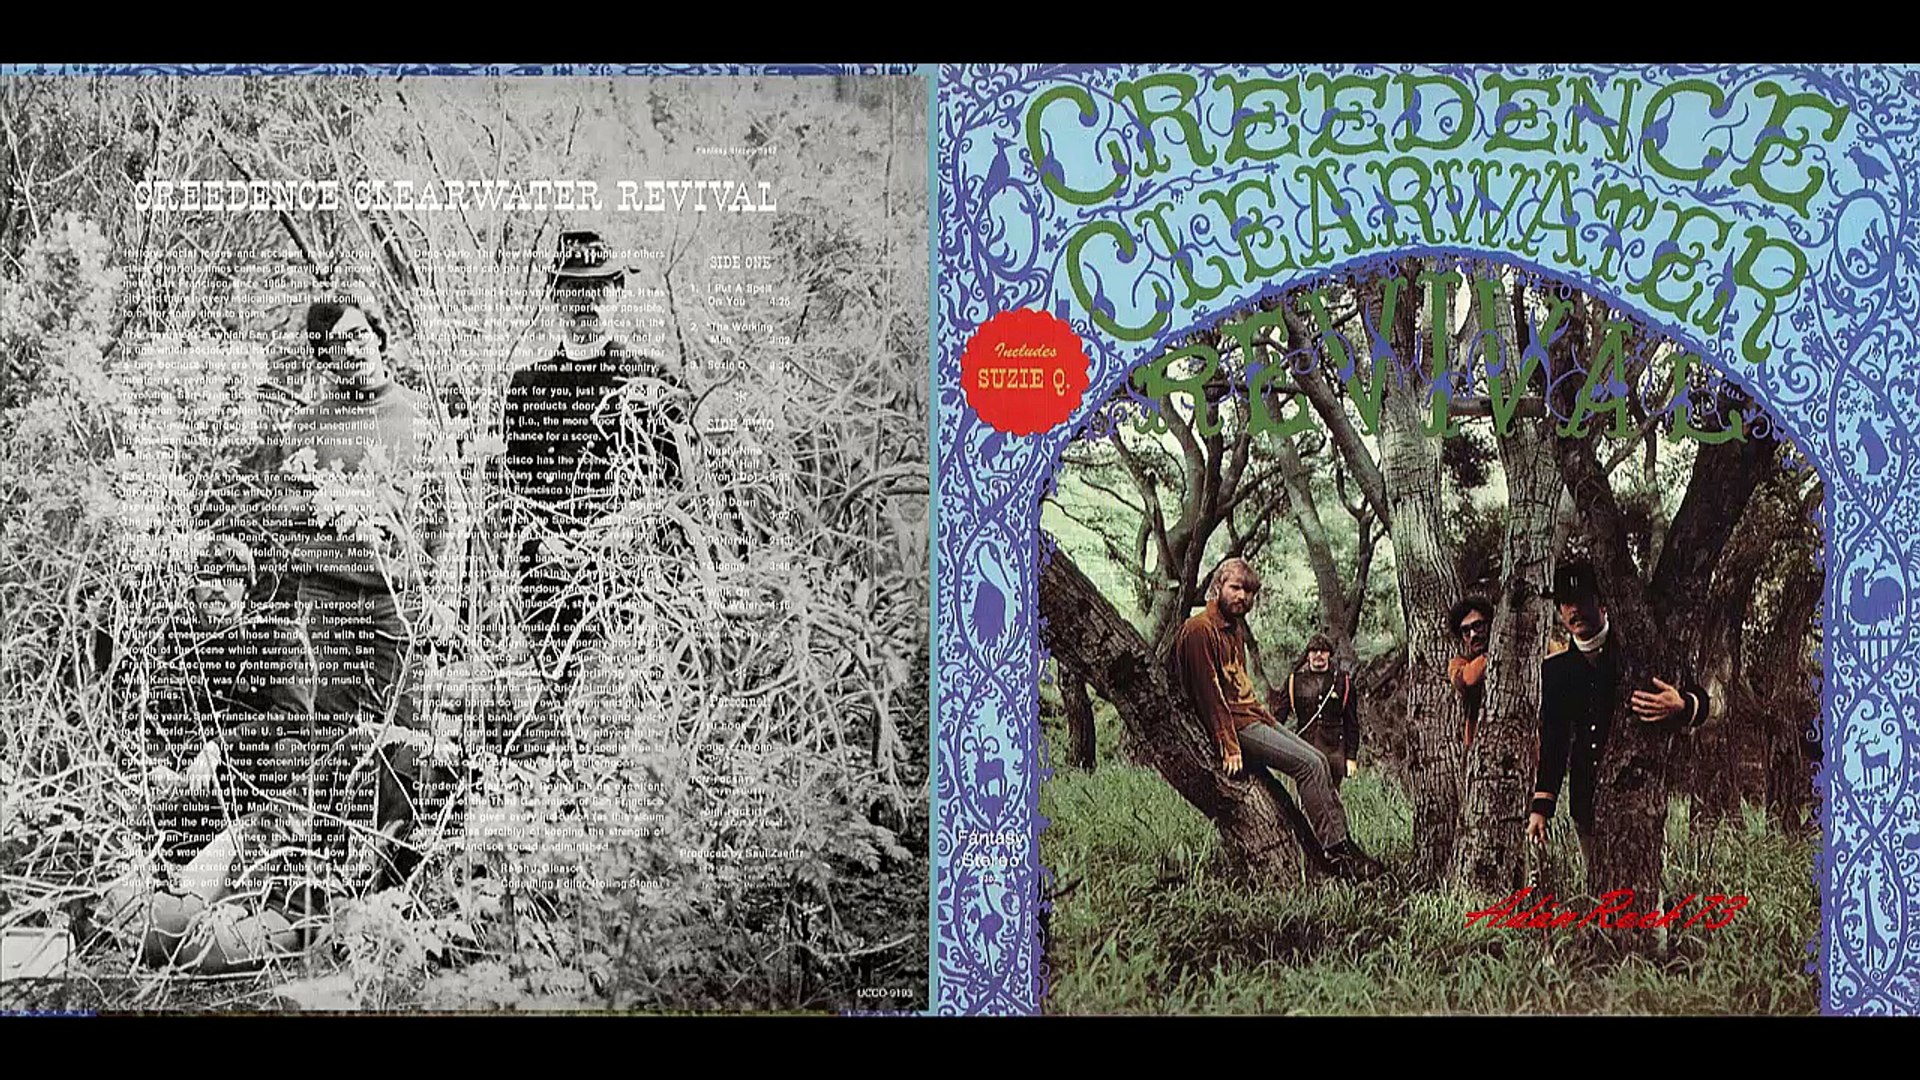 ⁣Creedence Clearwater Revival - Susie Q (CCR 1968)